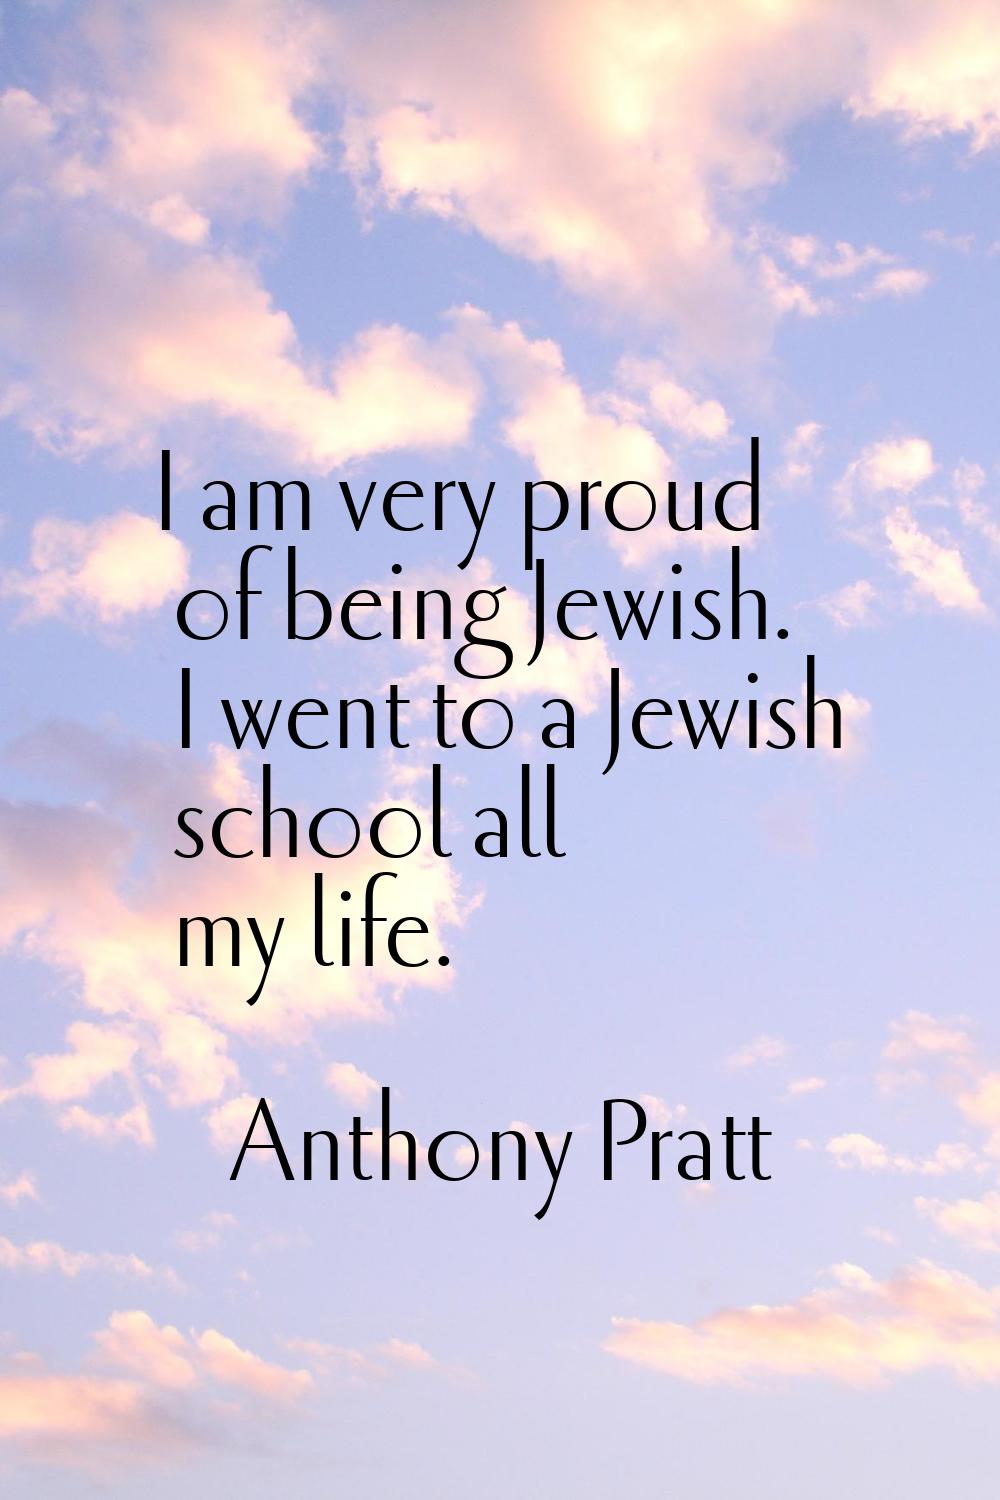 I am very proud of being Jewish. I went to a Jewish school all my life.